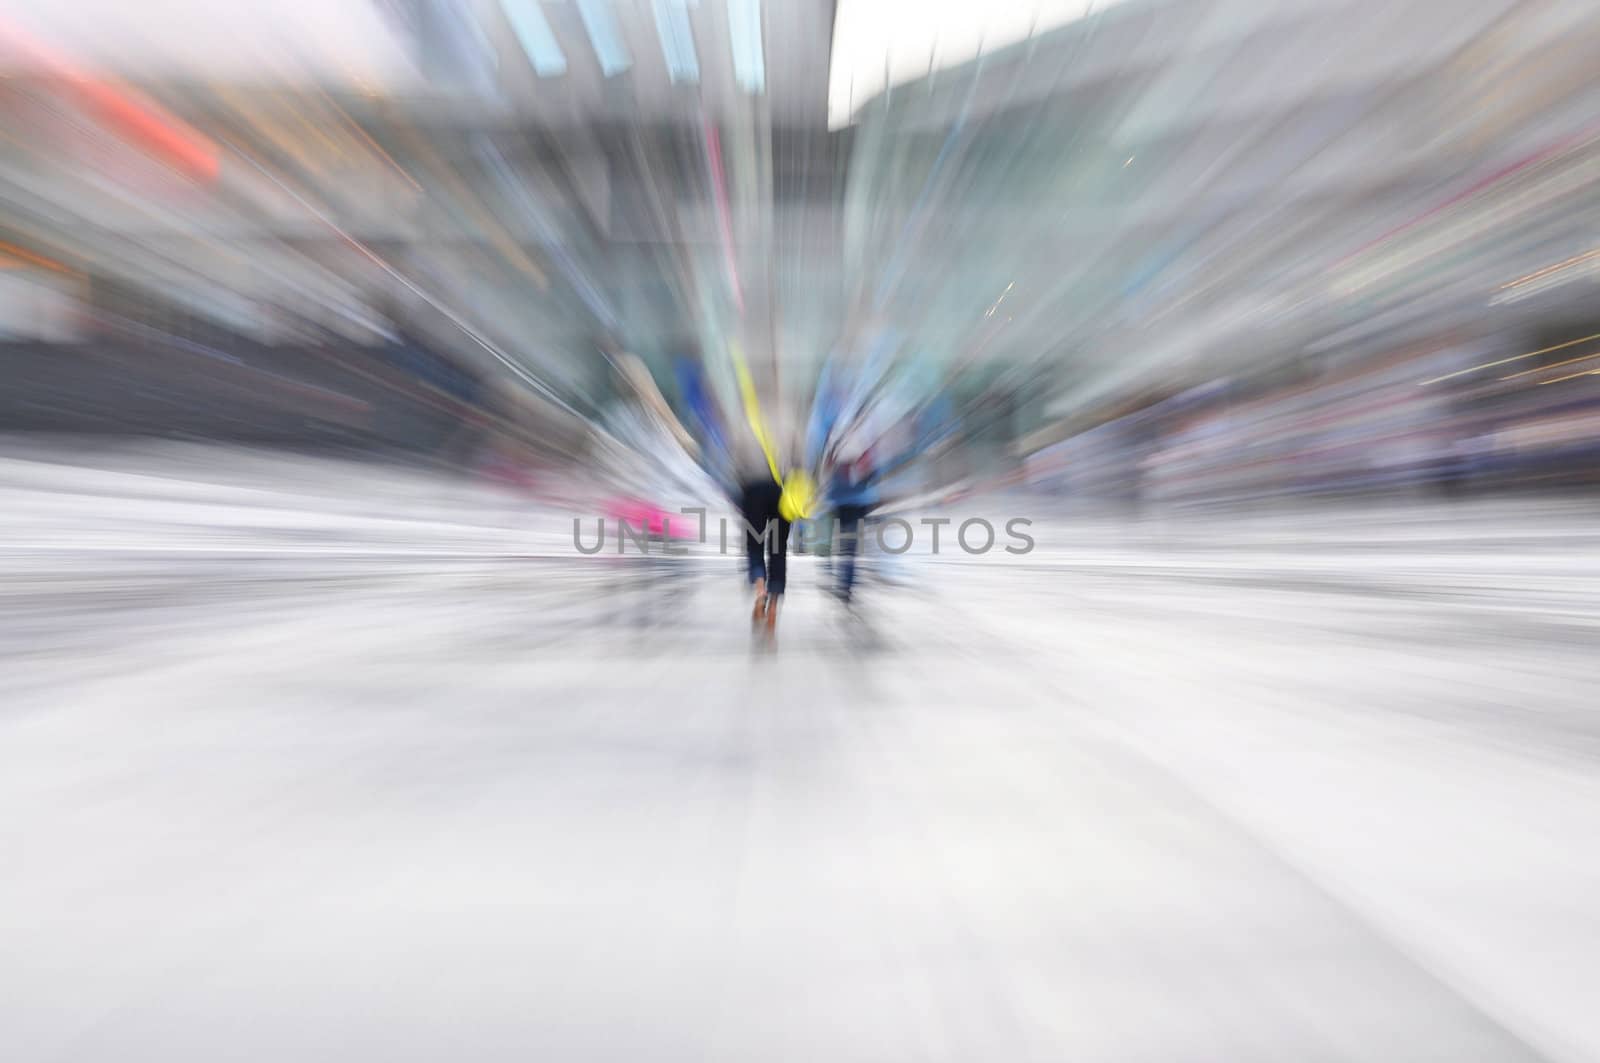 Young city life in motion blur.